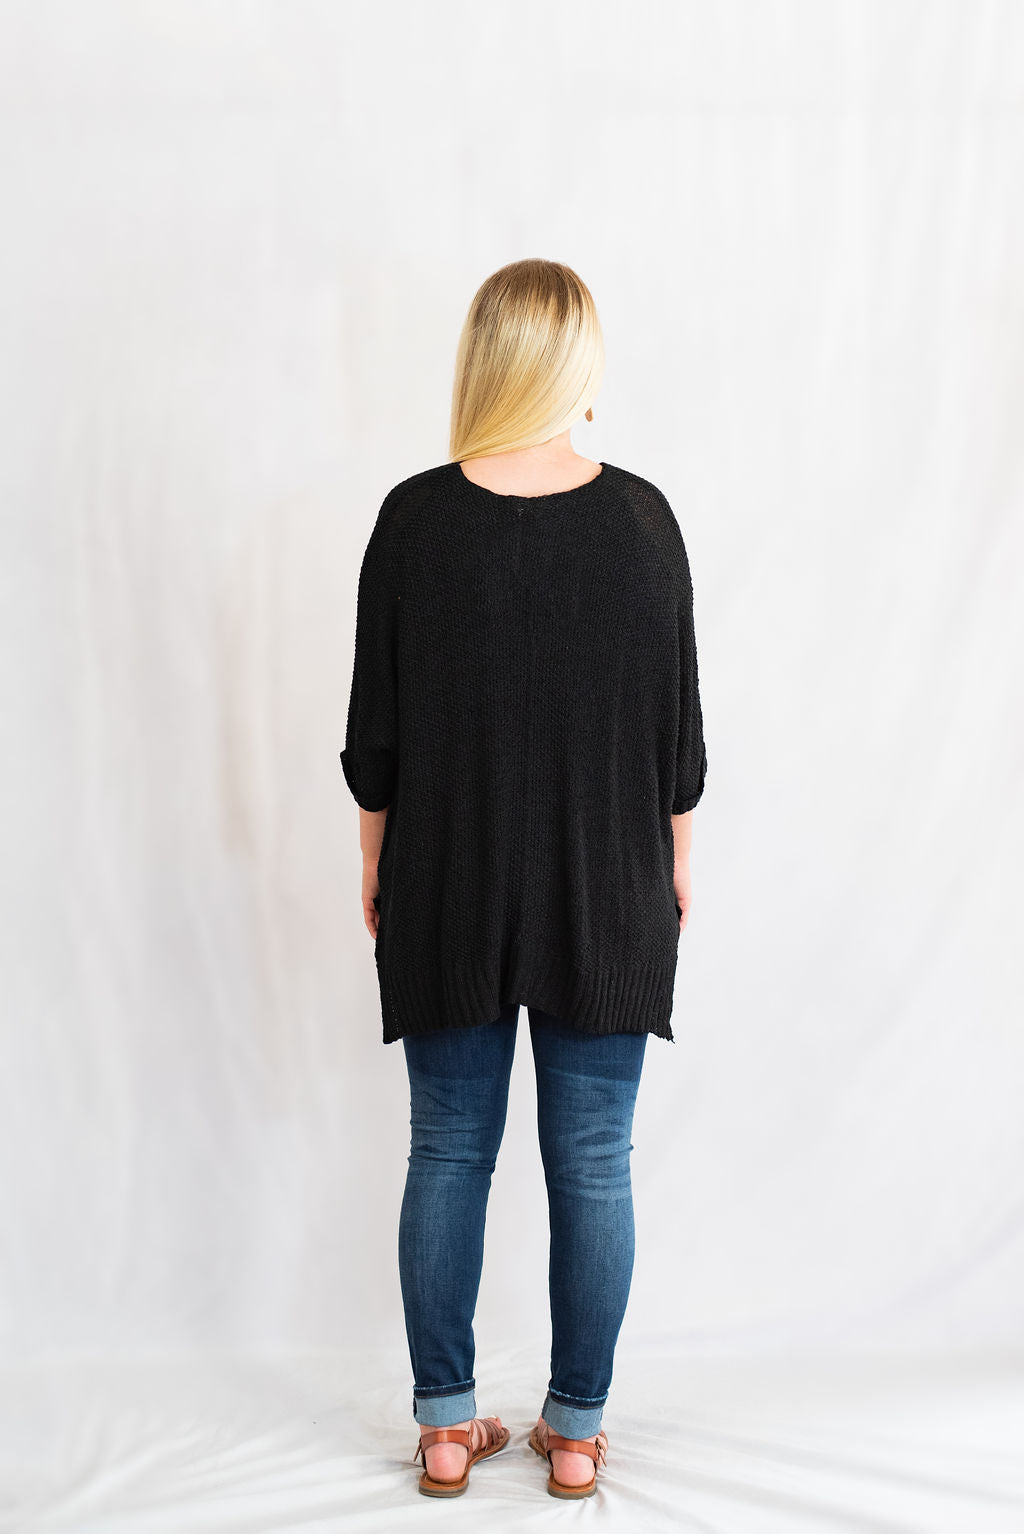 It’s A Breeze Tunic Sweater Knit Top by Easel Clothing